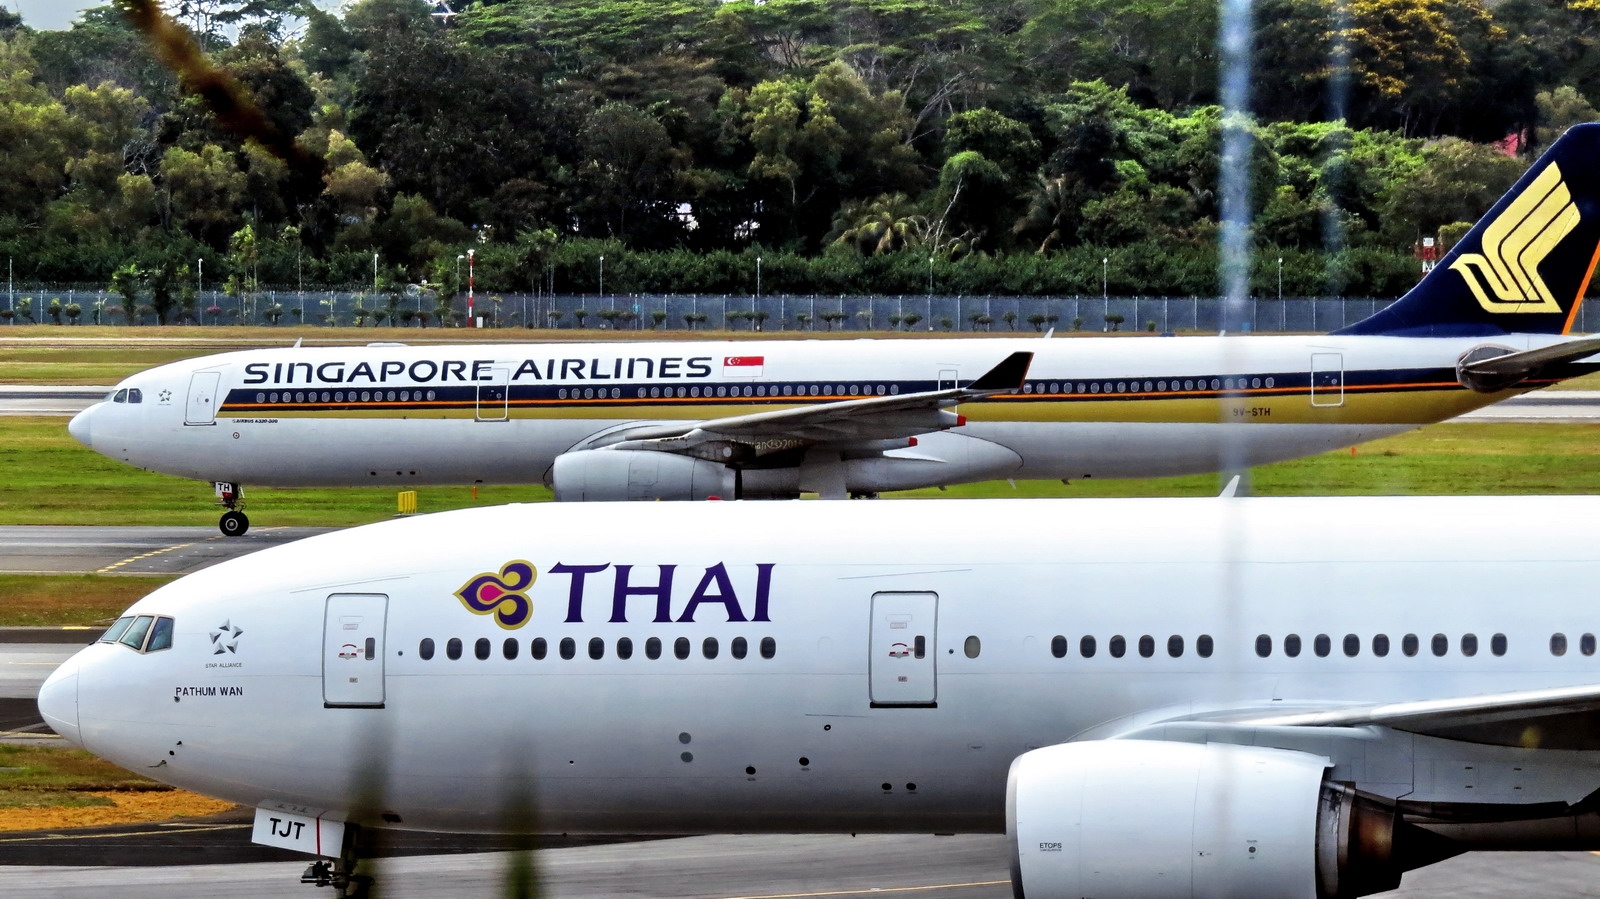 Singapore and Thai airliners on the ground